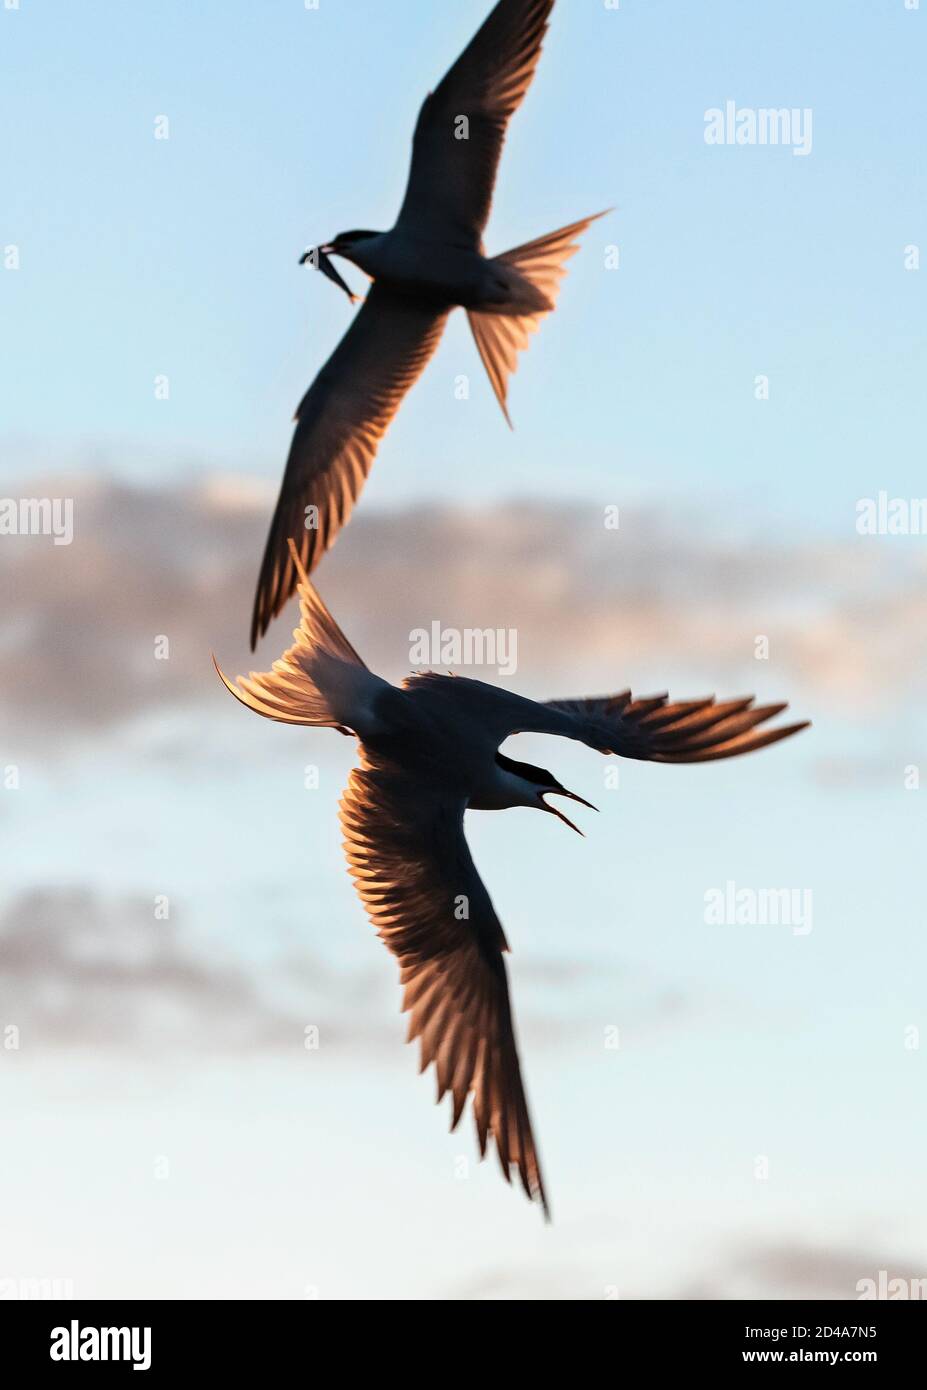 Silhouettes of flying common terns with fish in beak. Flying common tern on the sunset sky background. Scientific name: Sterna hirundo. Stock Photo